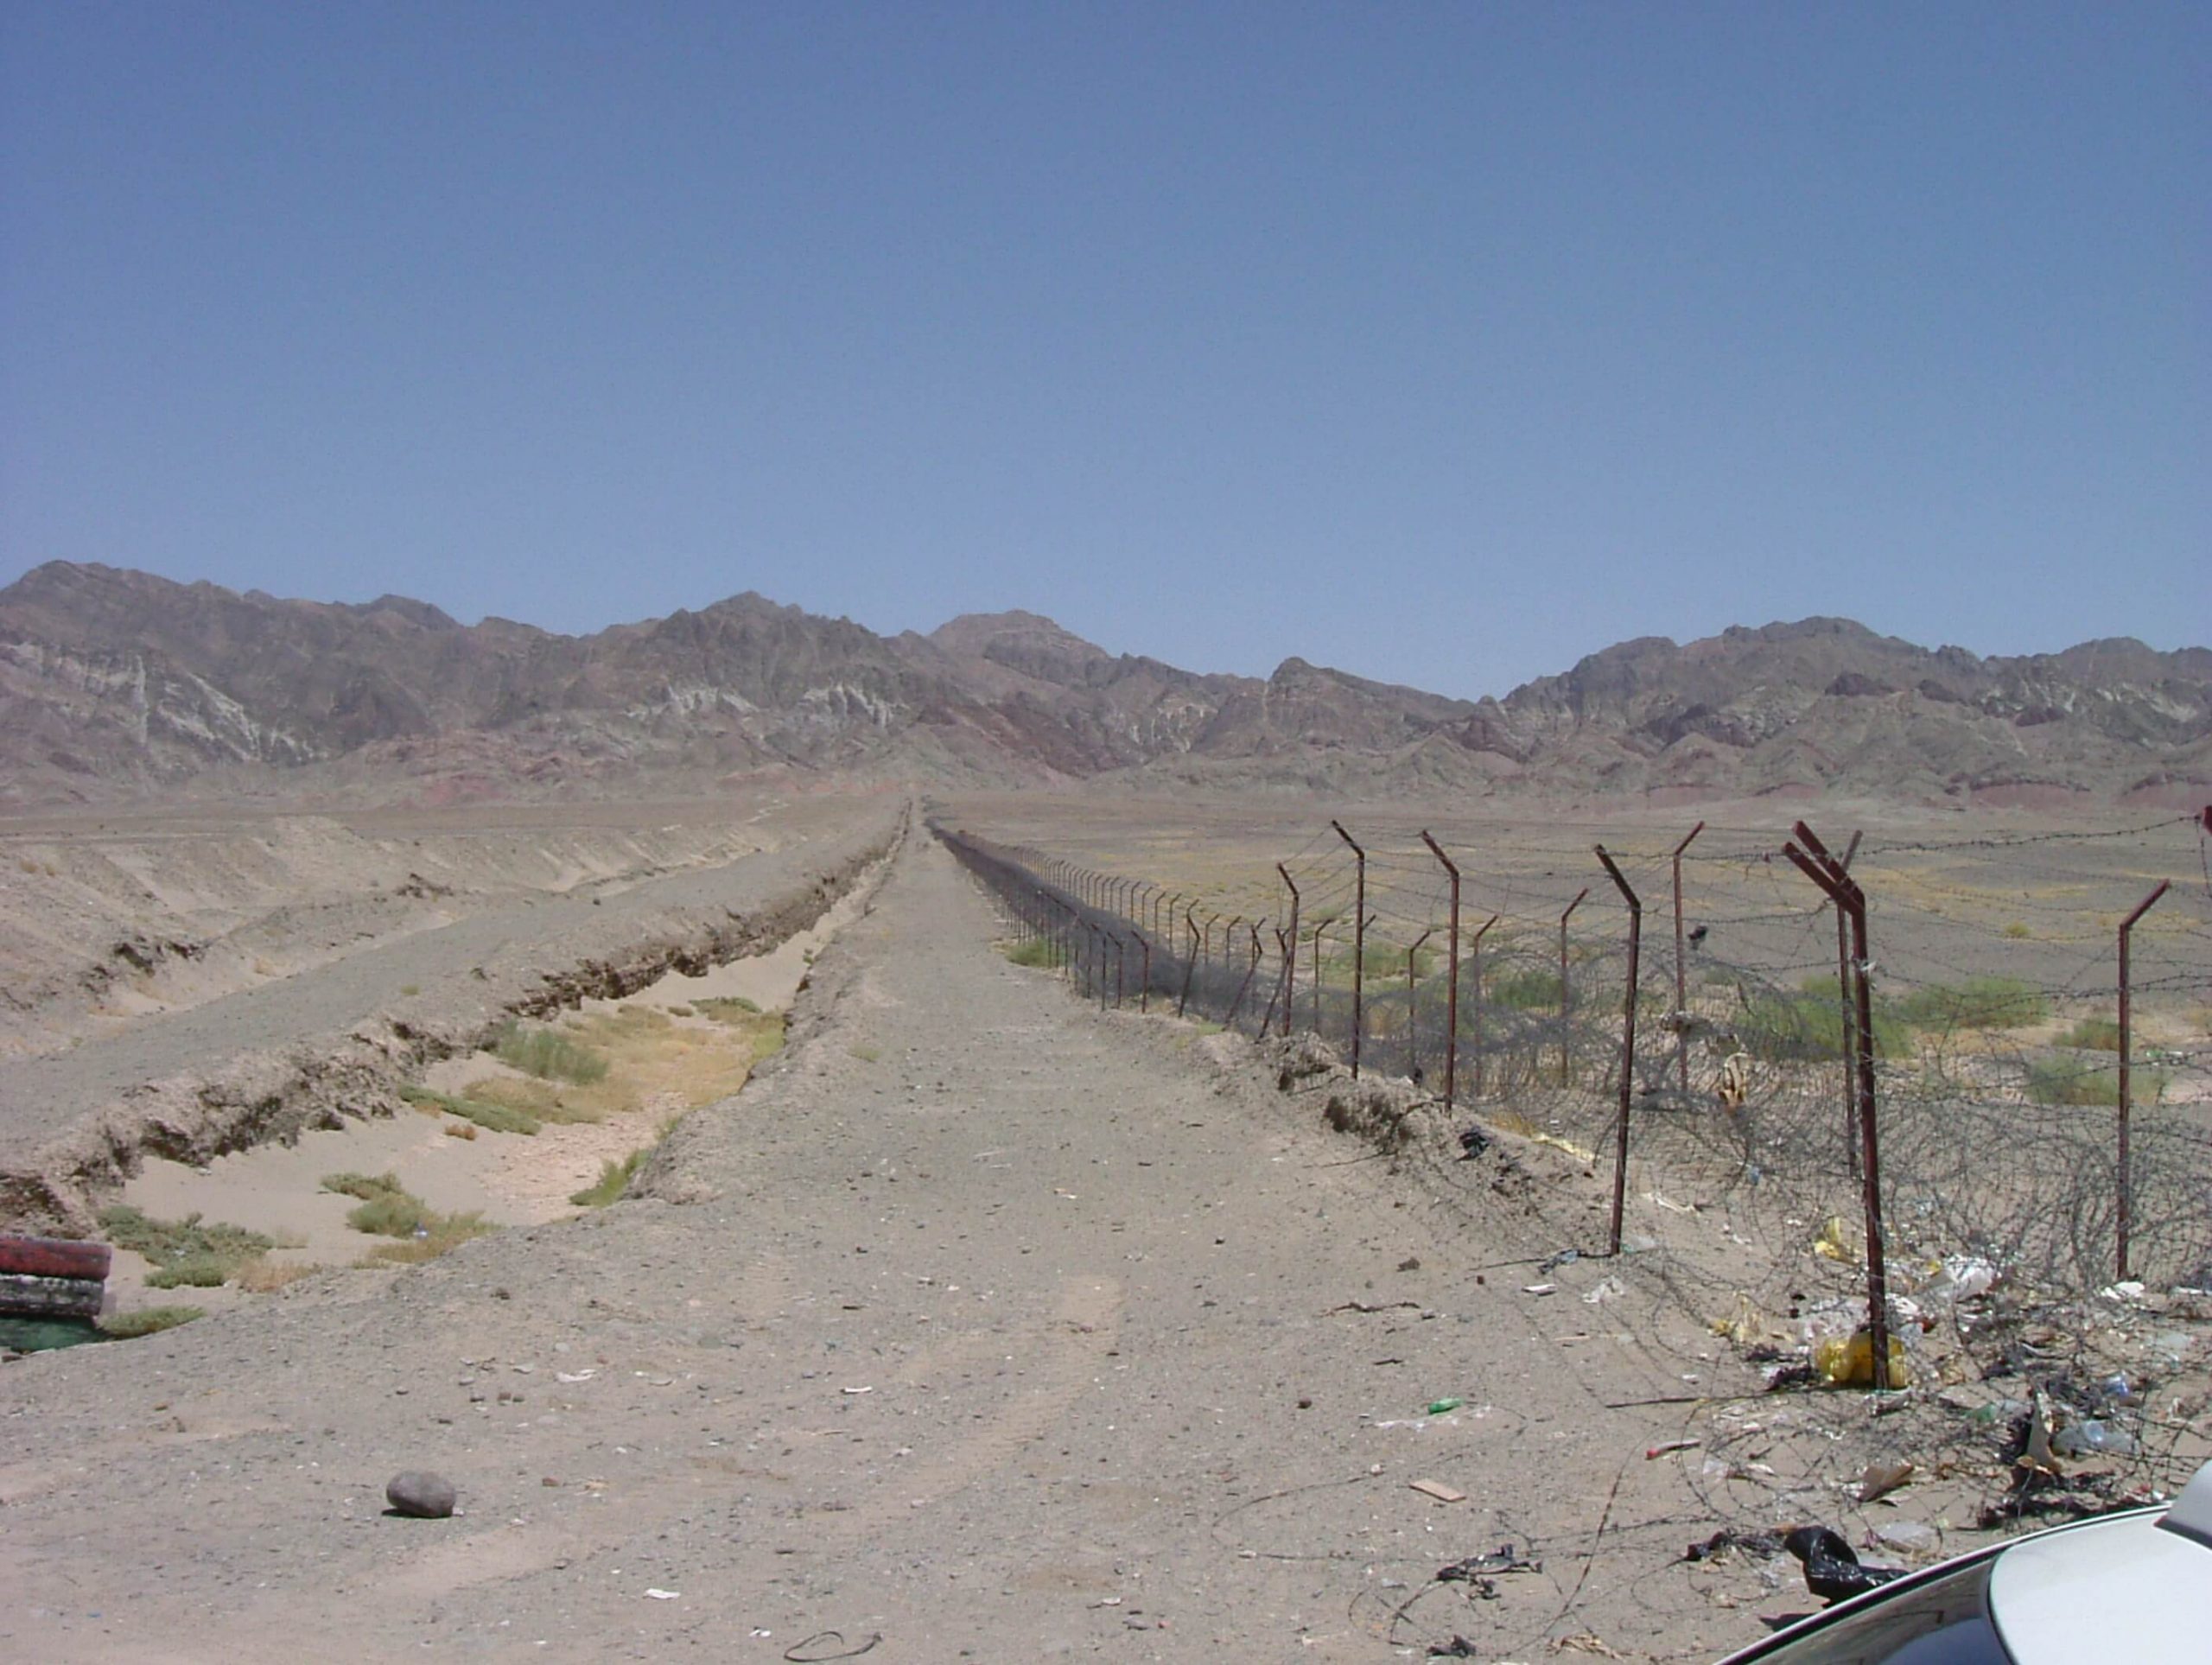 Iran And Pakistan Discussed Over Fencing on Border